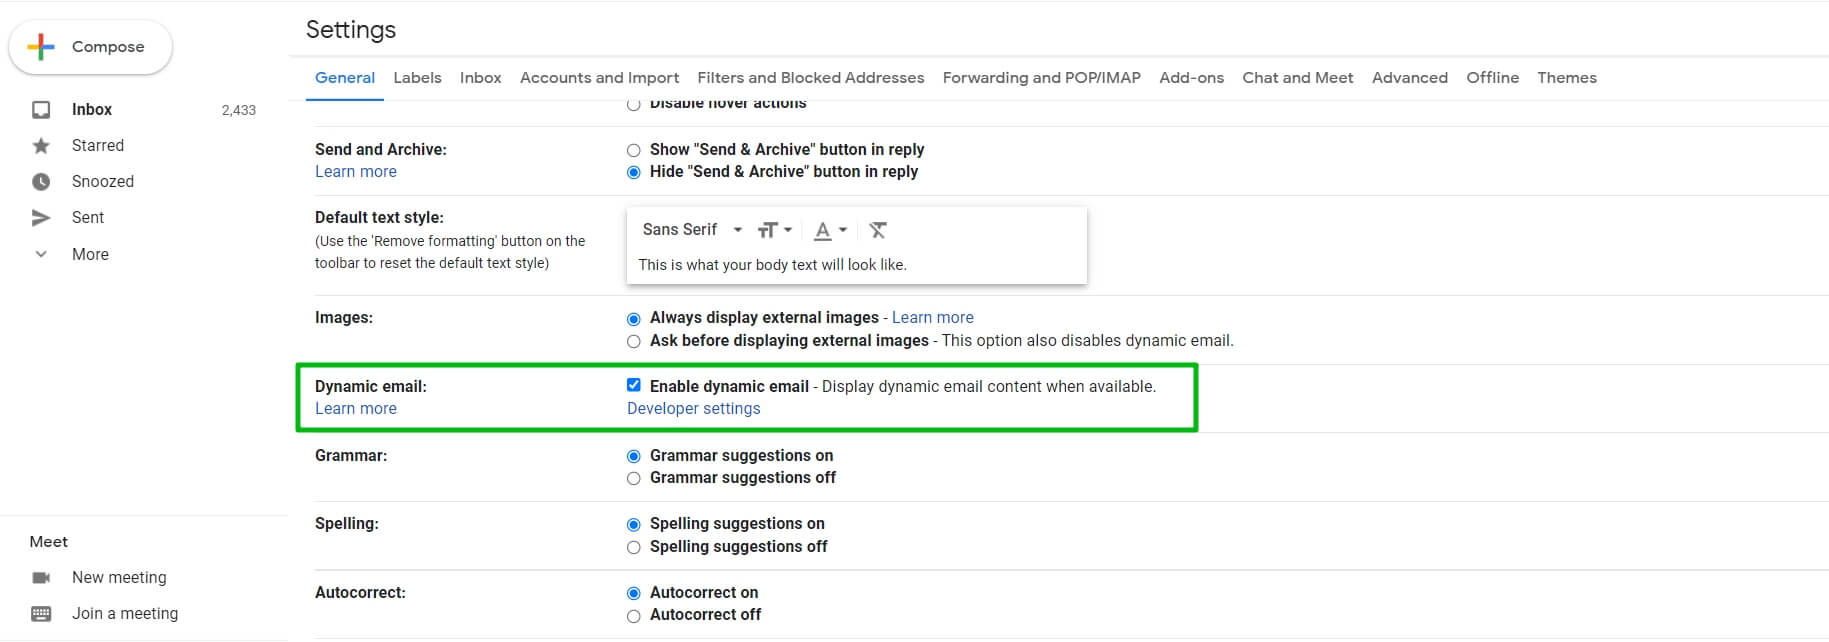 Enabling dynamic email in Gmail.